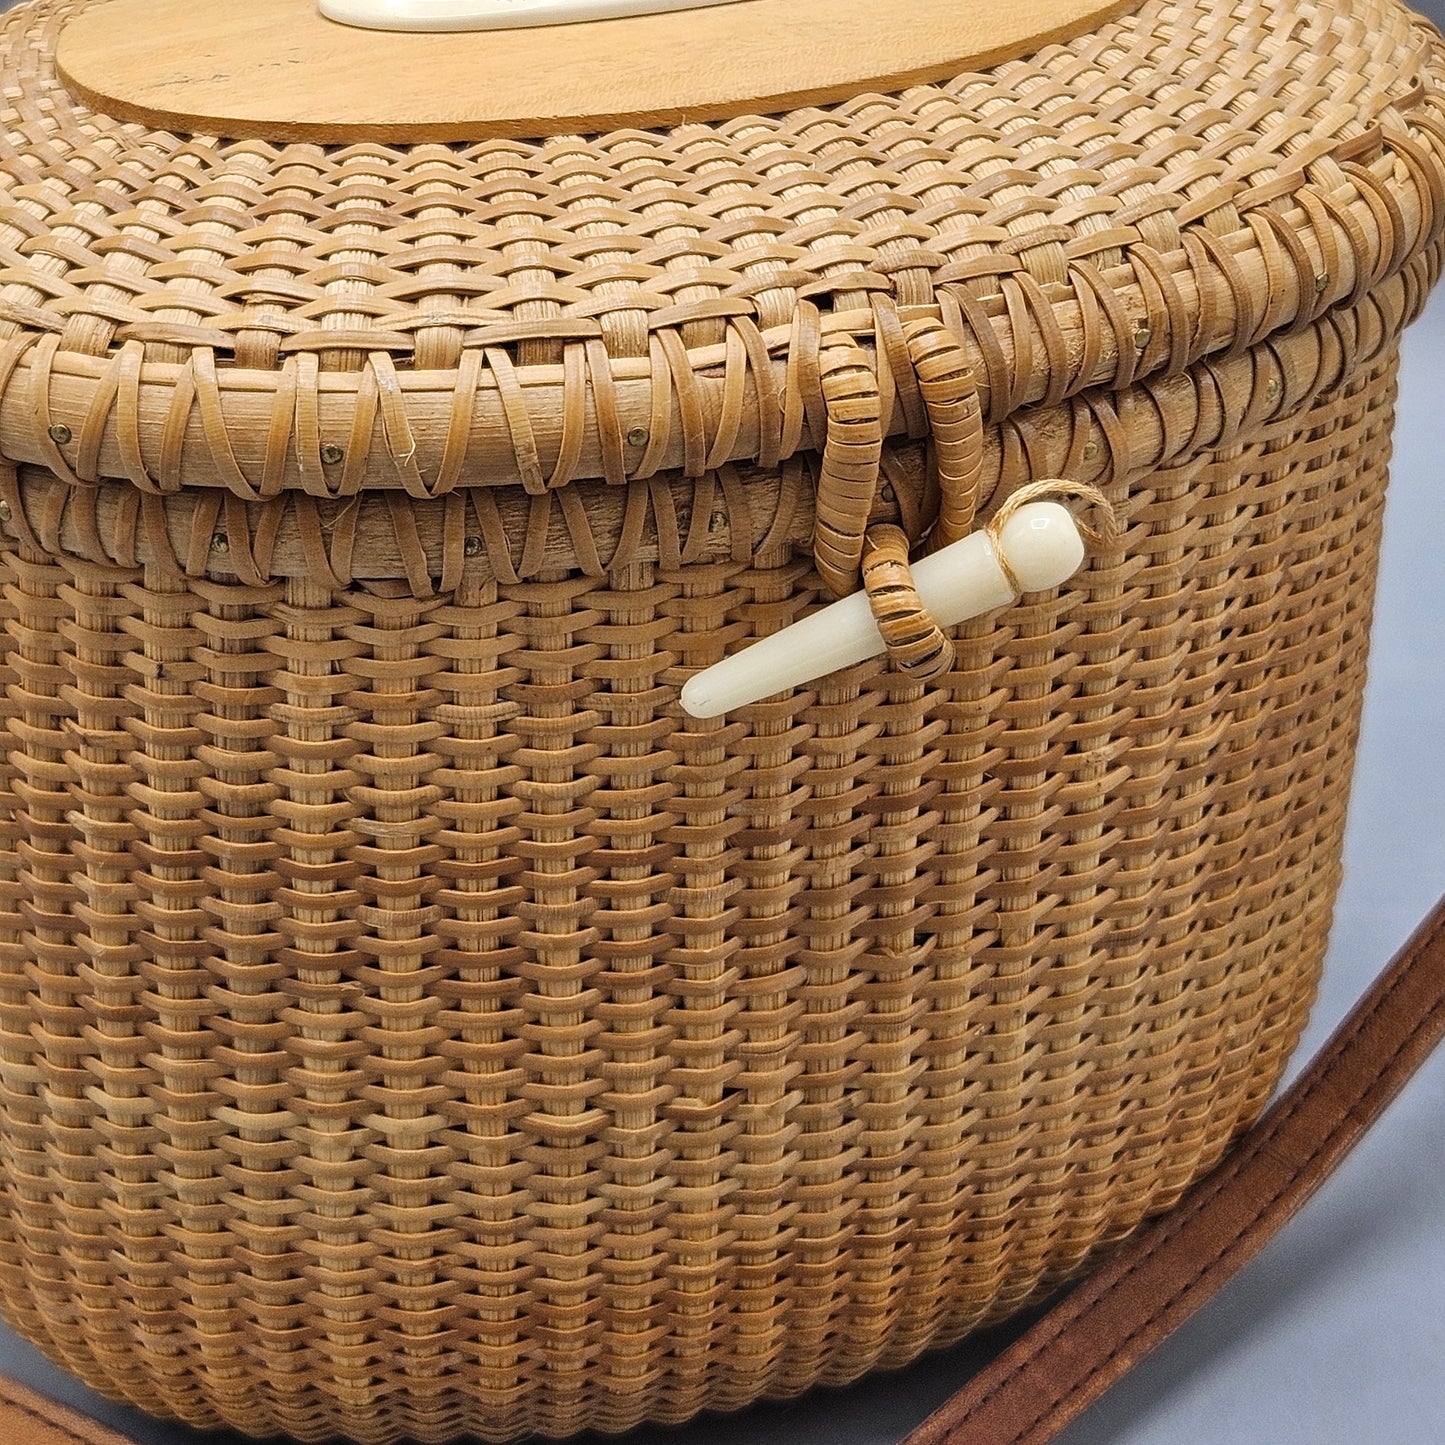 Nantucket Basket with Town Scene on Top & Leather Strap